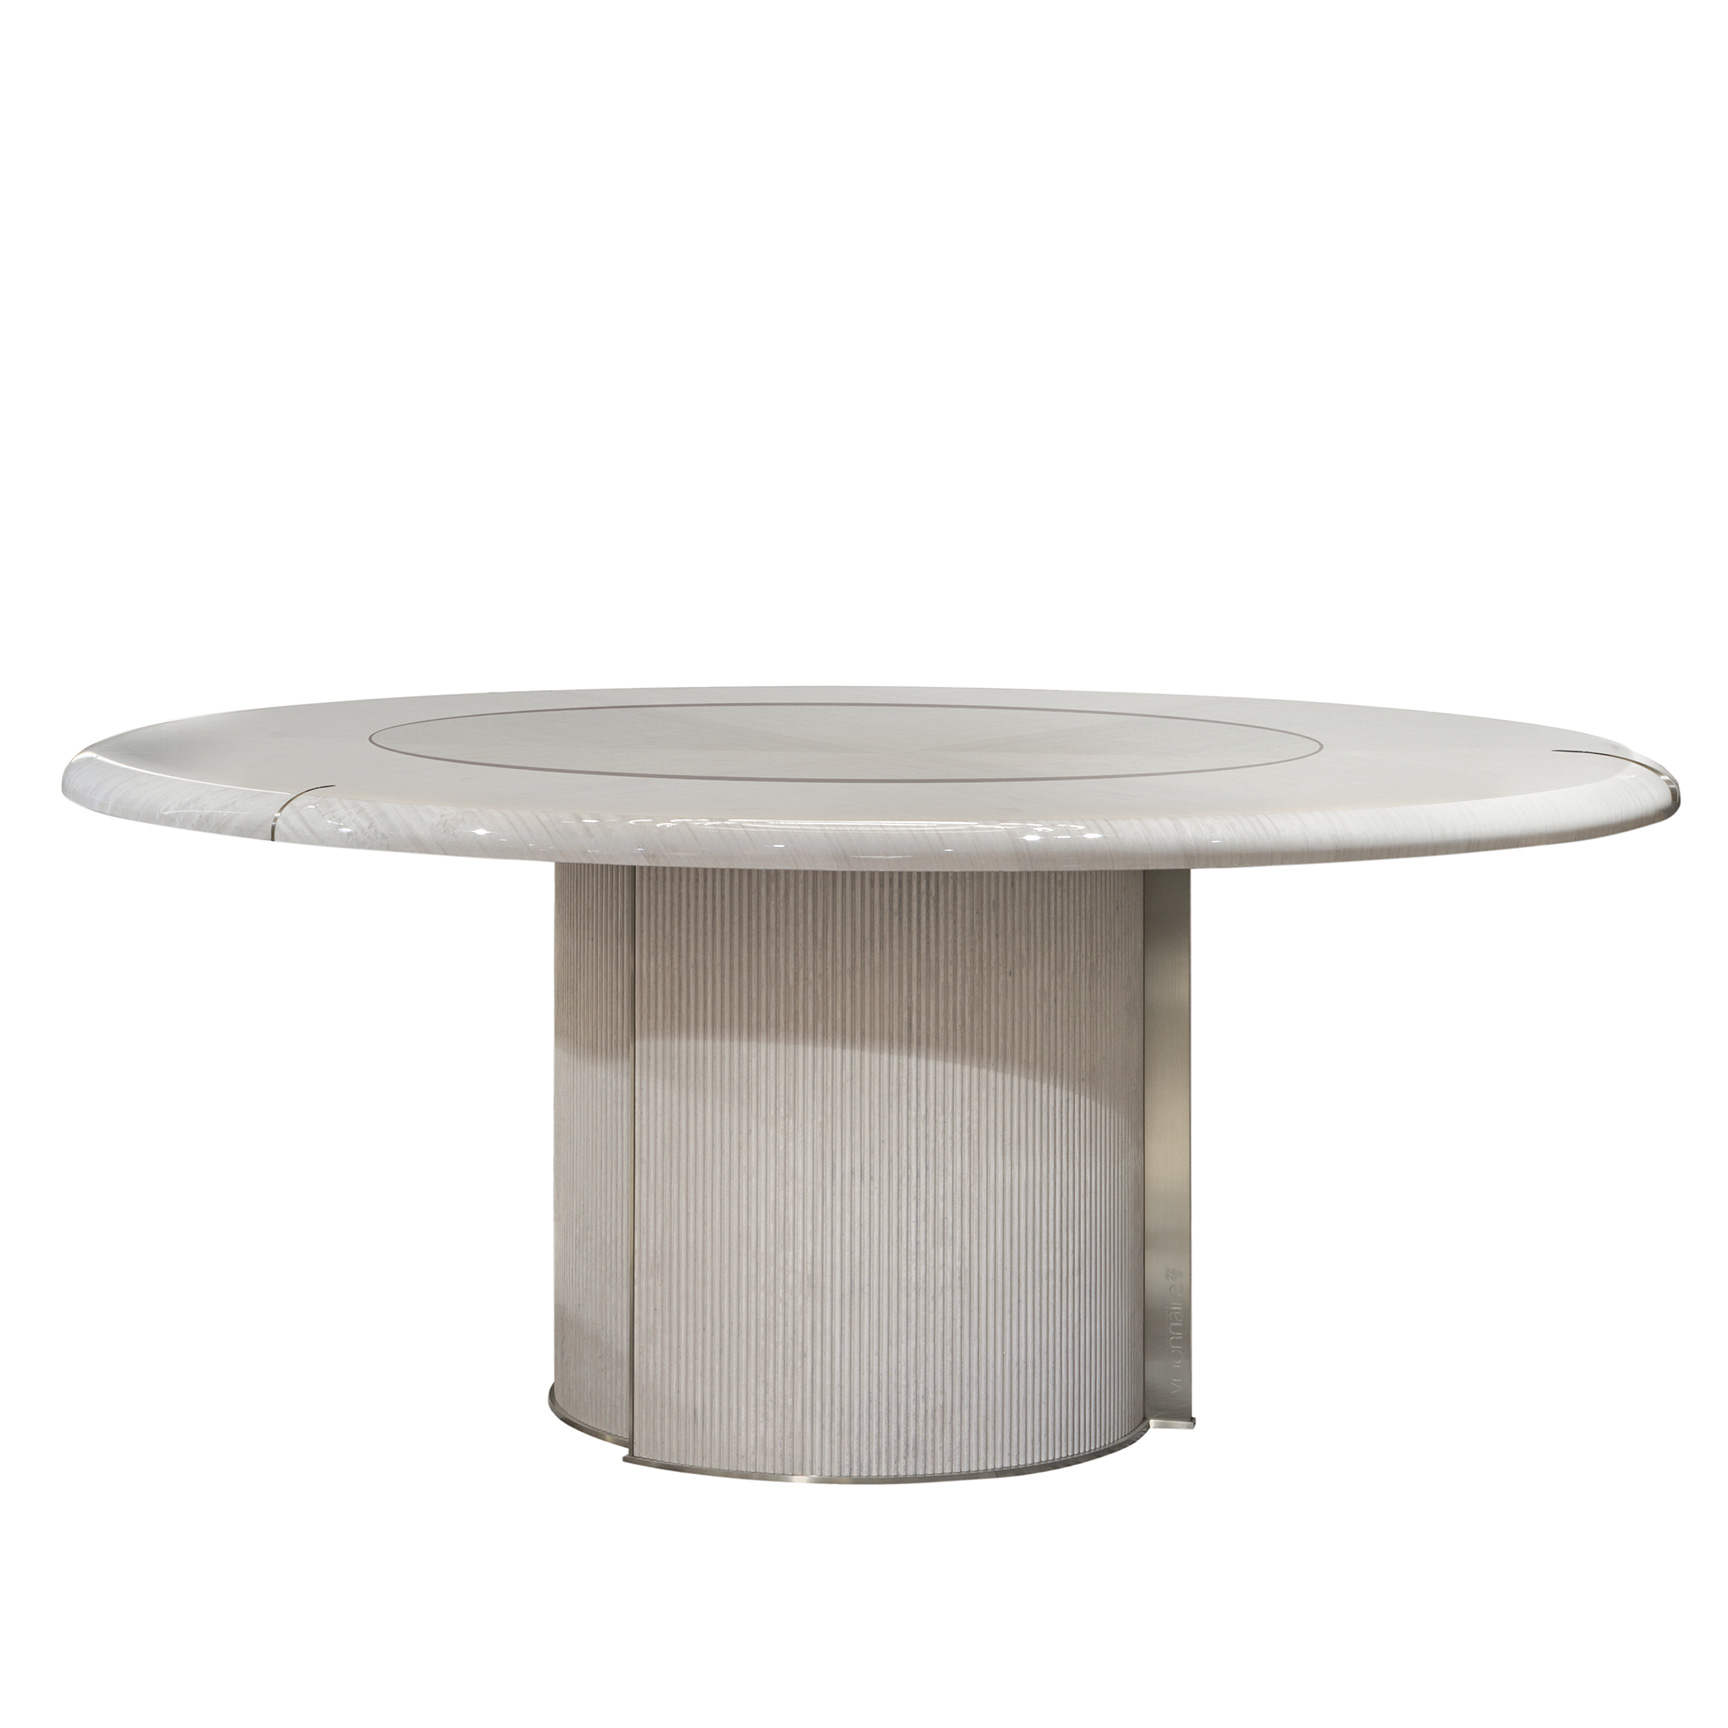 Visionnaire Opera Table